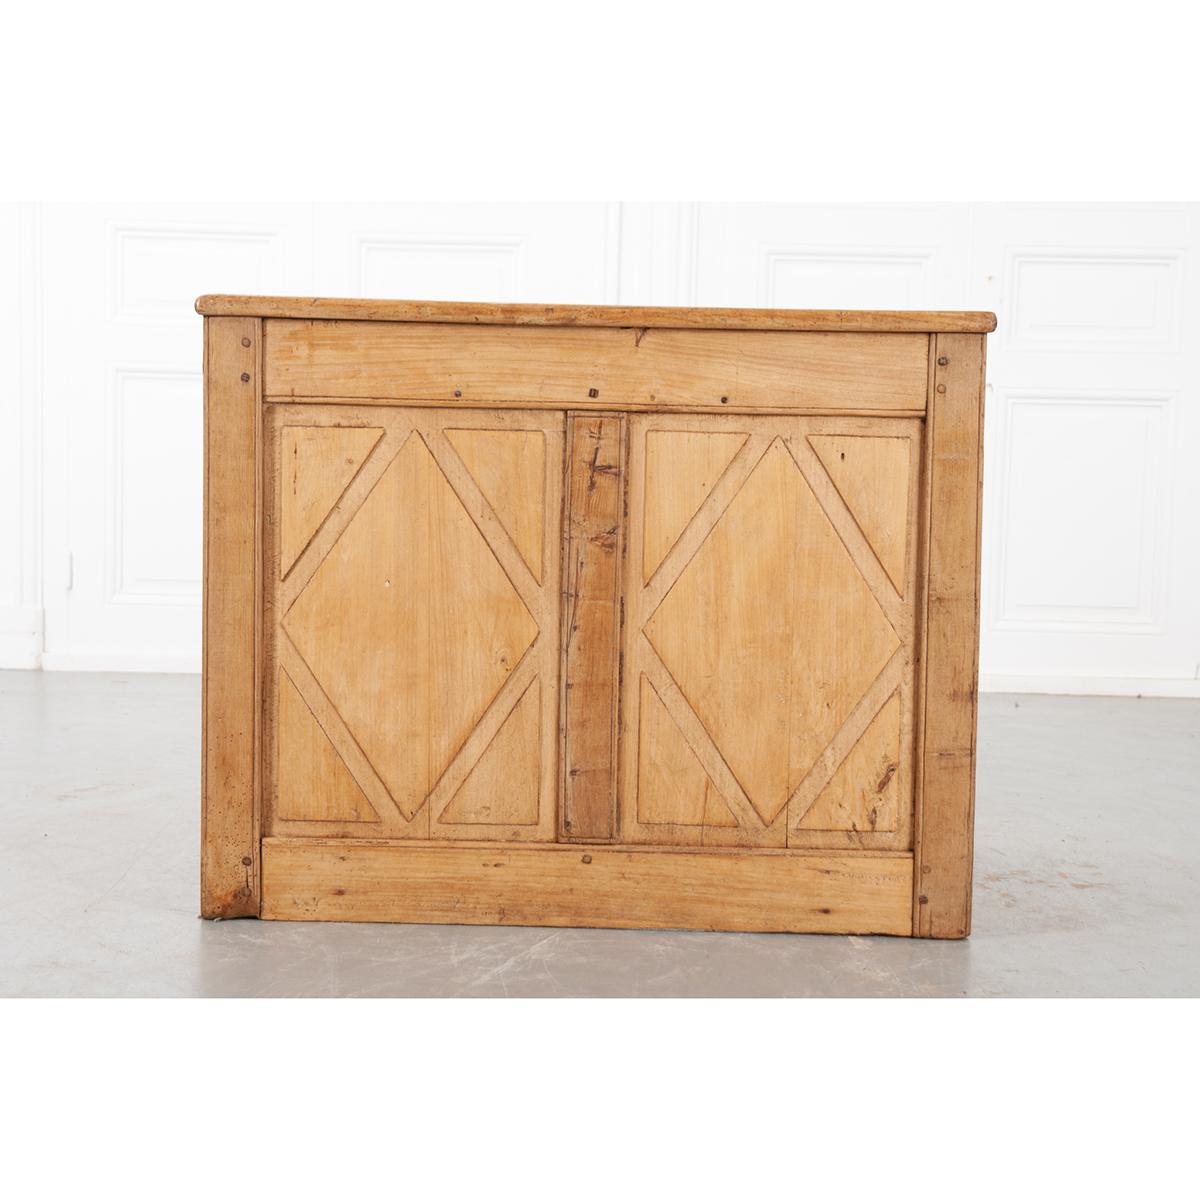 English 19th Century Pine Auctioneer’s Cash Desk For Sale 3